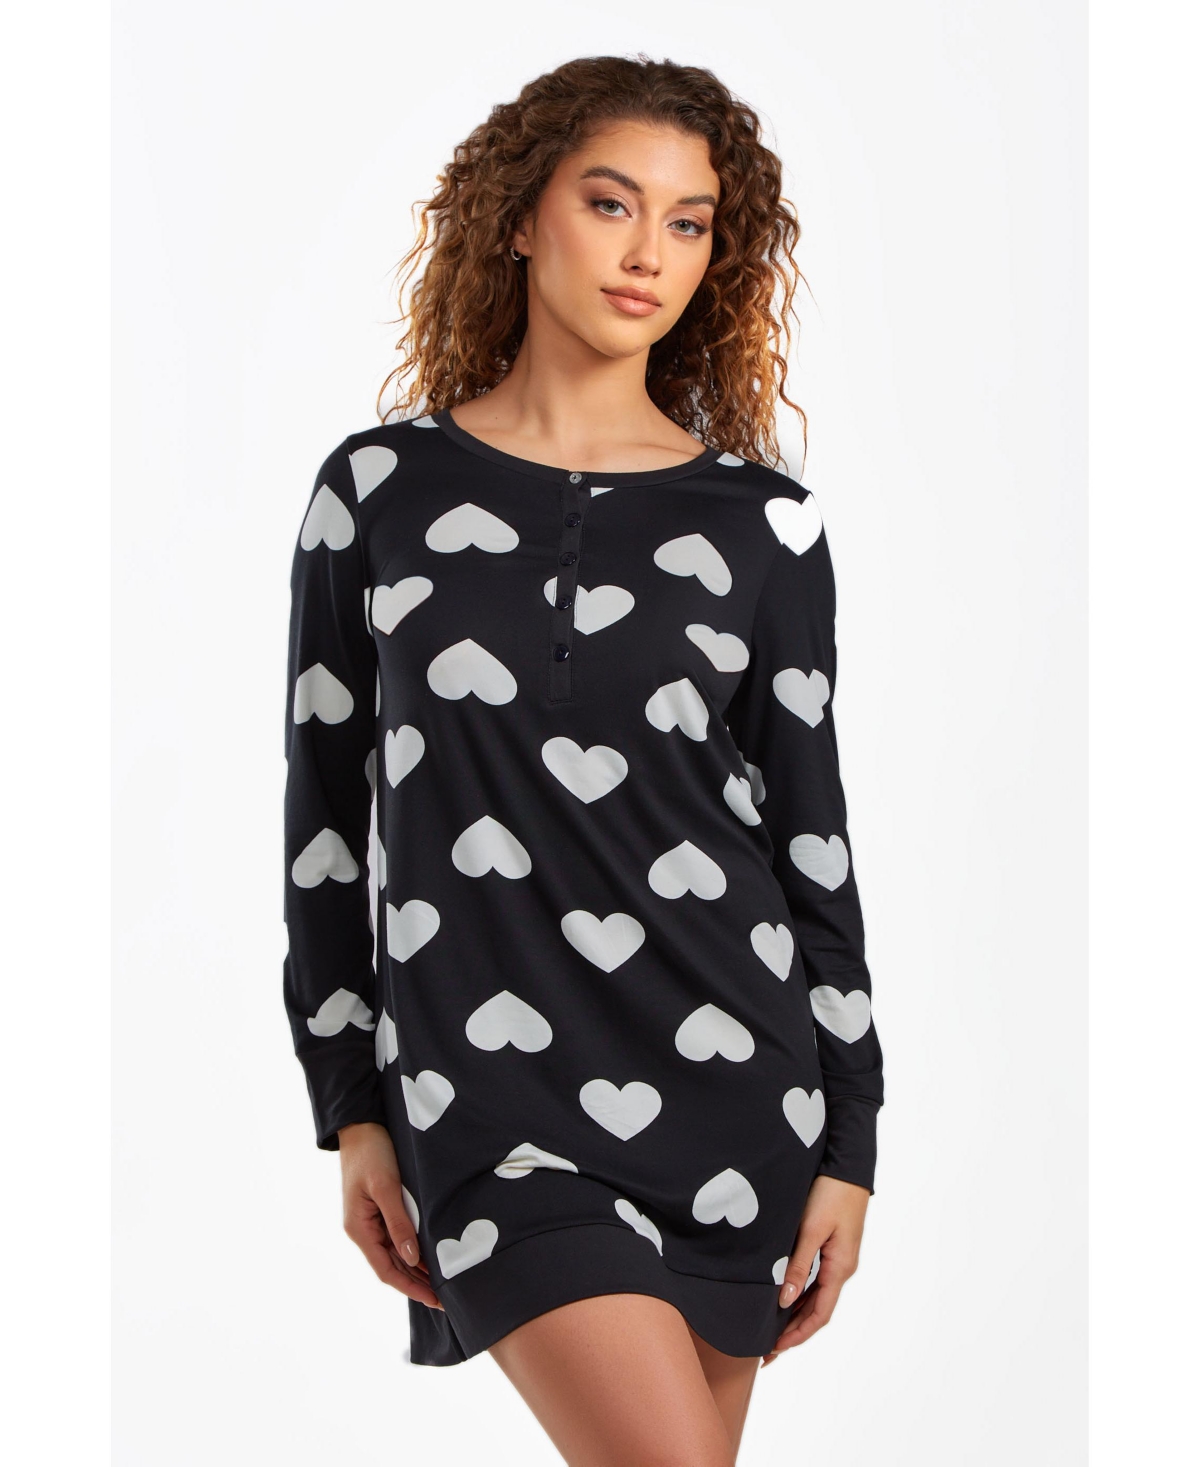 Icollection Kind Heart Plus Size Modal Sleep Top Or Dress With Button Down Top In Comfy Cozy Style In Cream-black